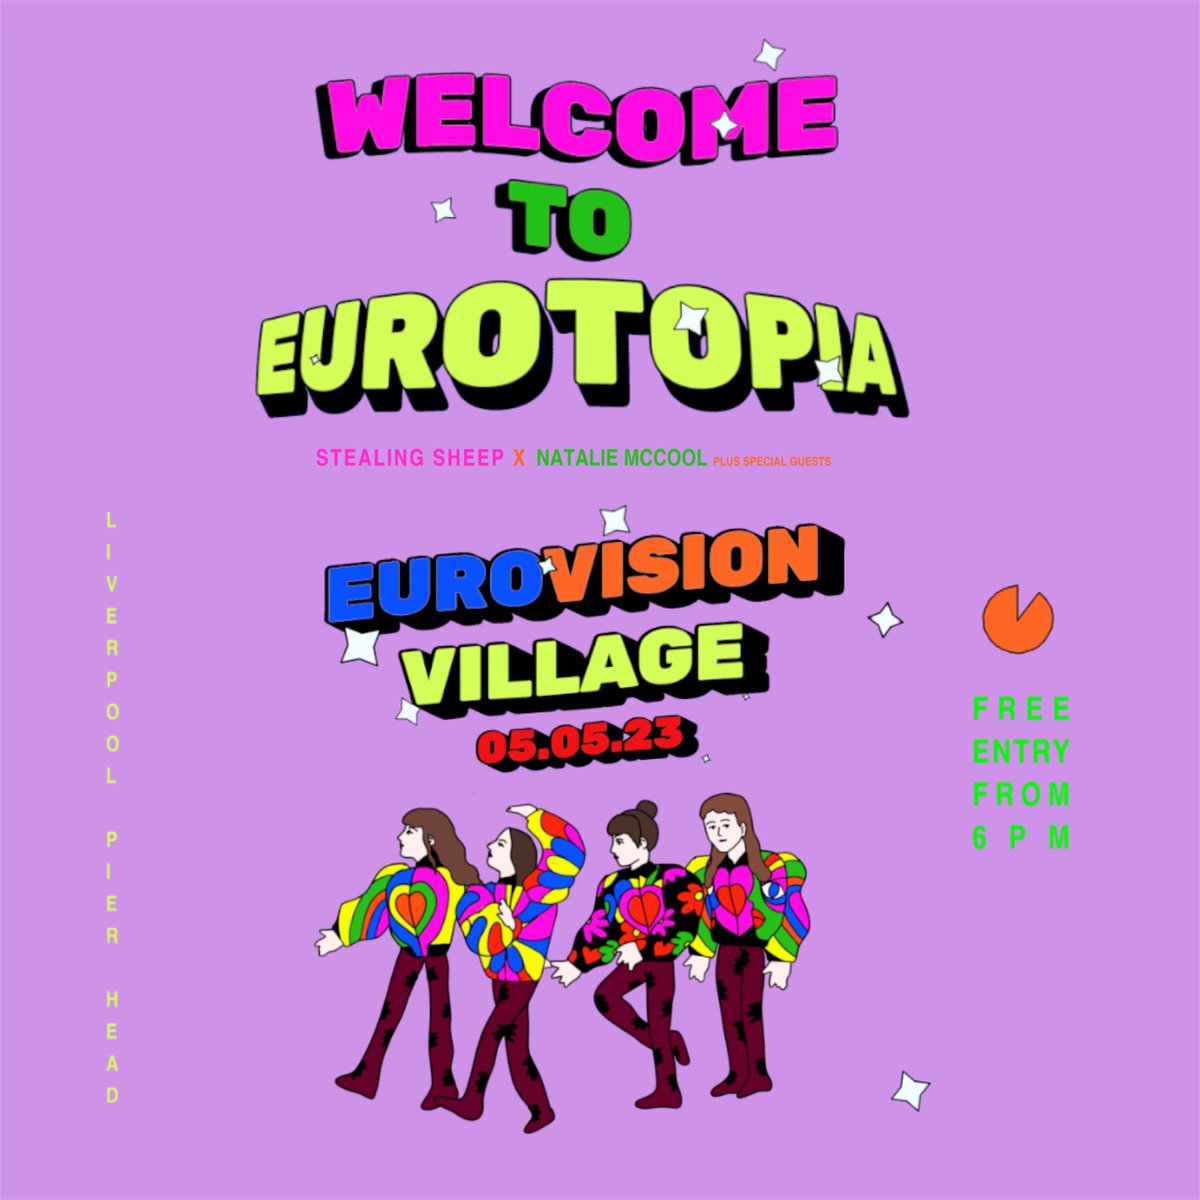 #WelcomeToEurotopia! ✨ Local musicians @NatalieMcCool & @stealingsheep will lead a line-up of hometown all-stars and Ukrainian artists at Eurovision Village on 5 May! ➡️ visitliverpool.com/event/welcome-…